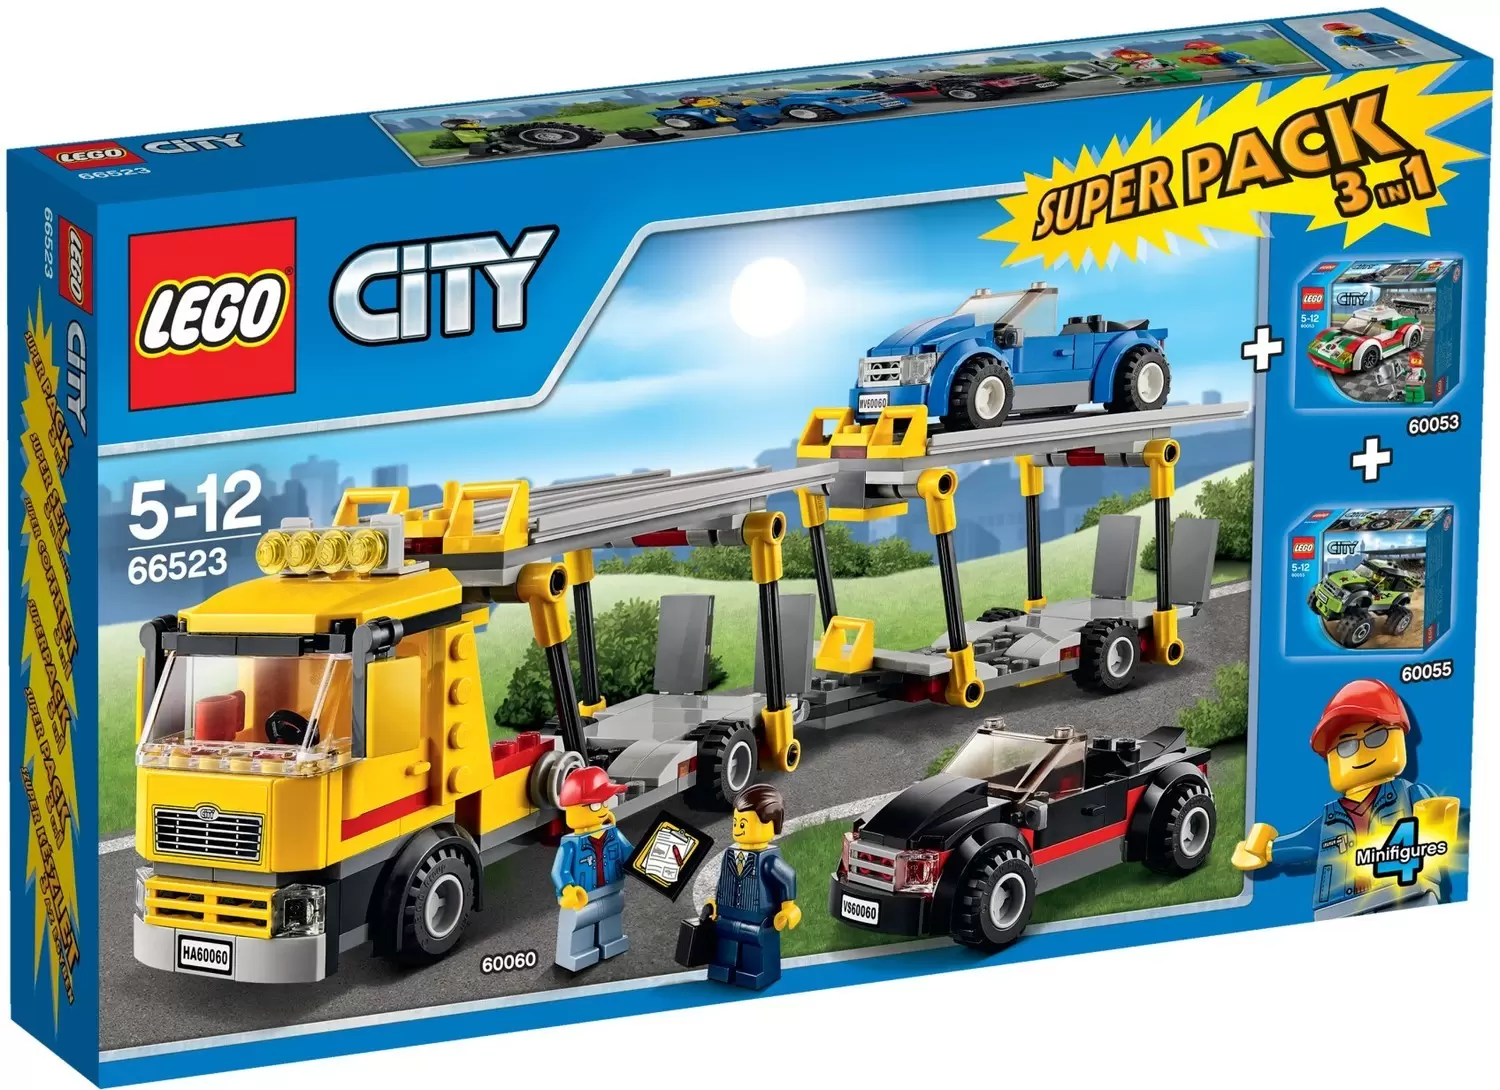 LEGO CITY - City Super Pack 3-in-1